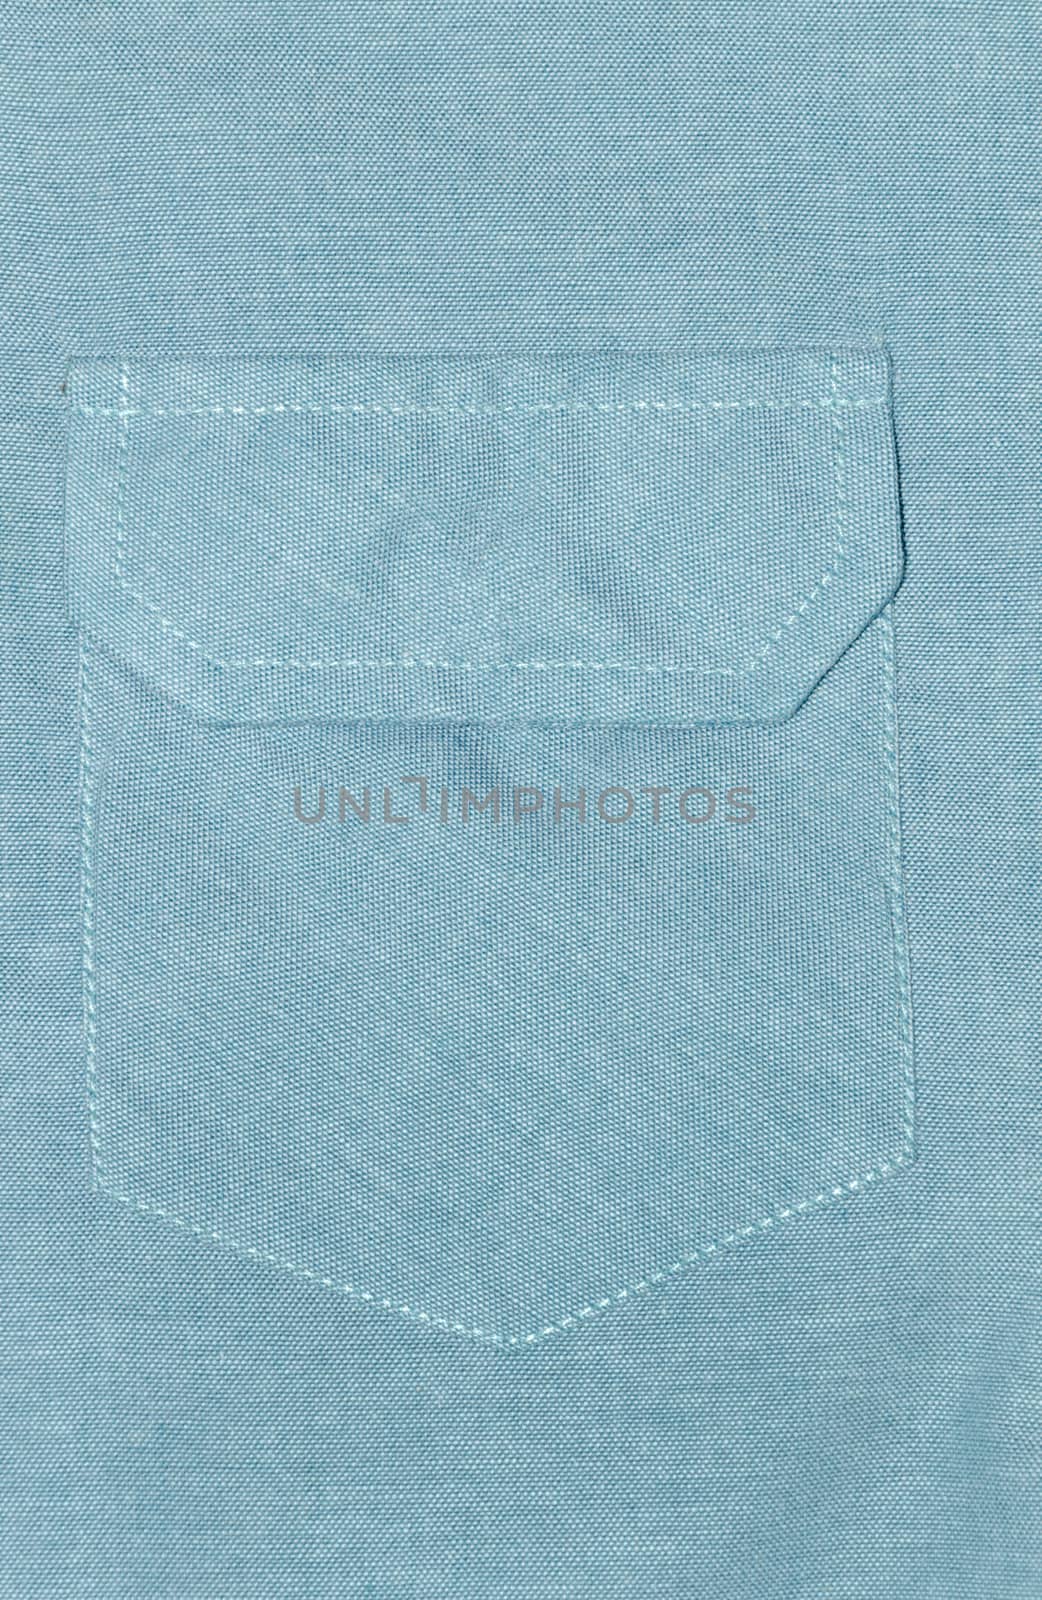 a cloth texture with bag